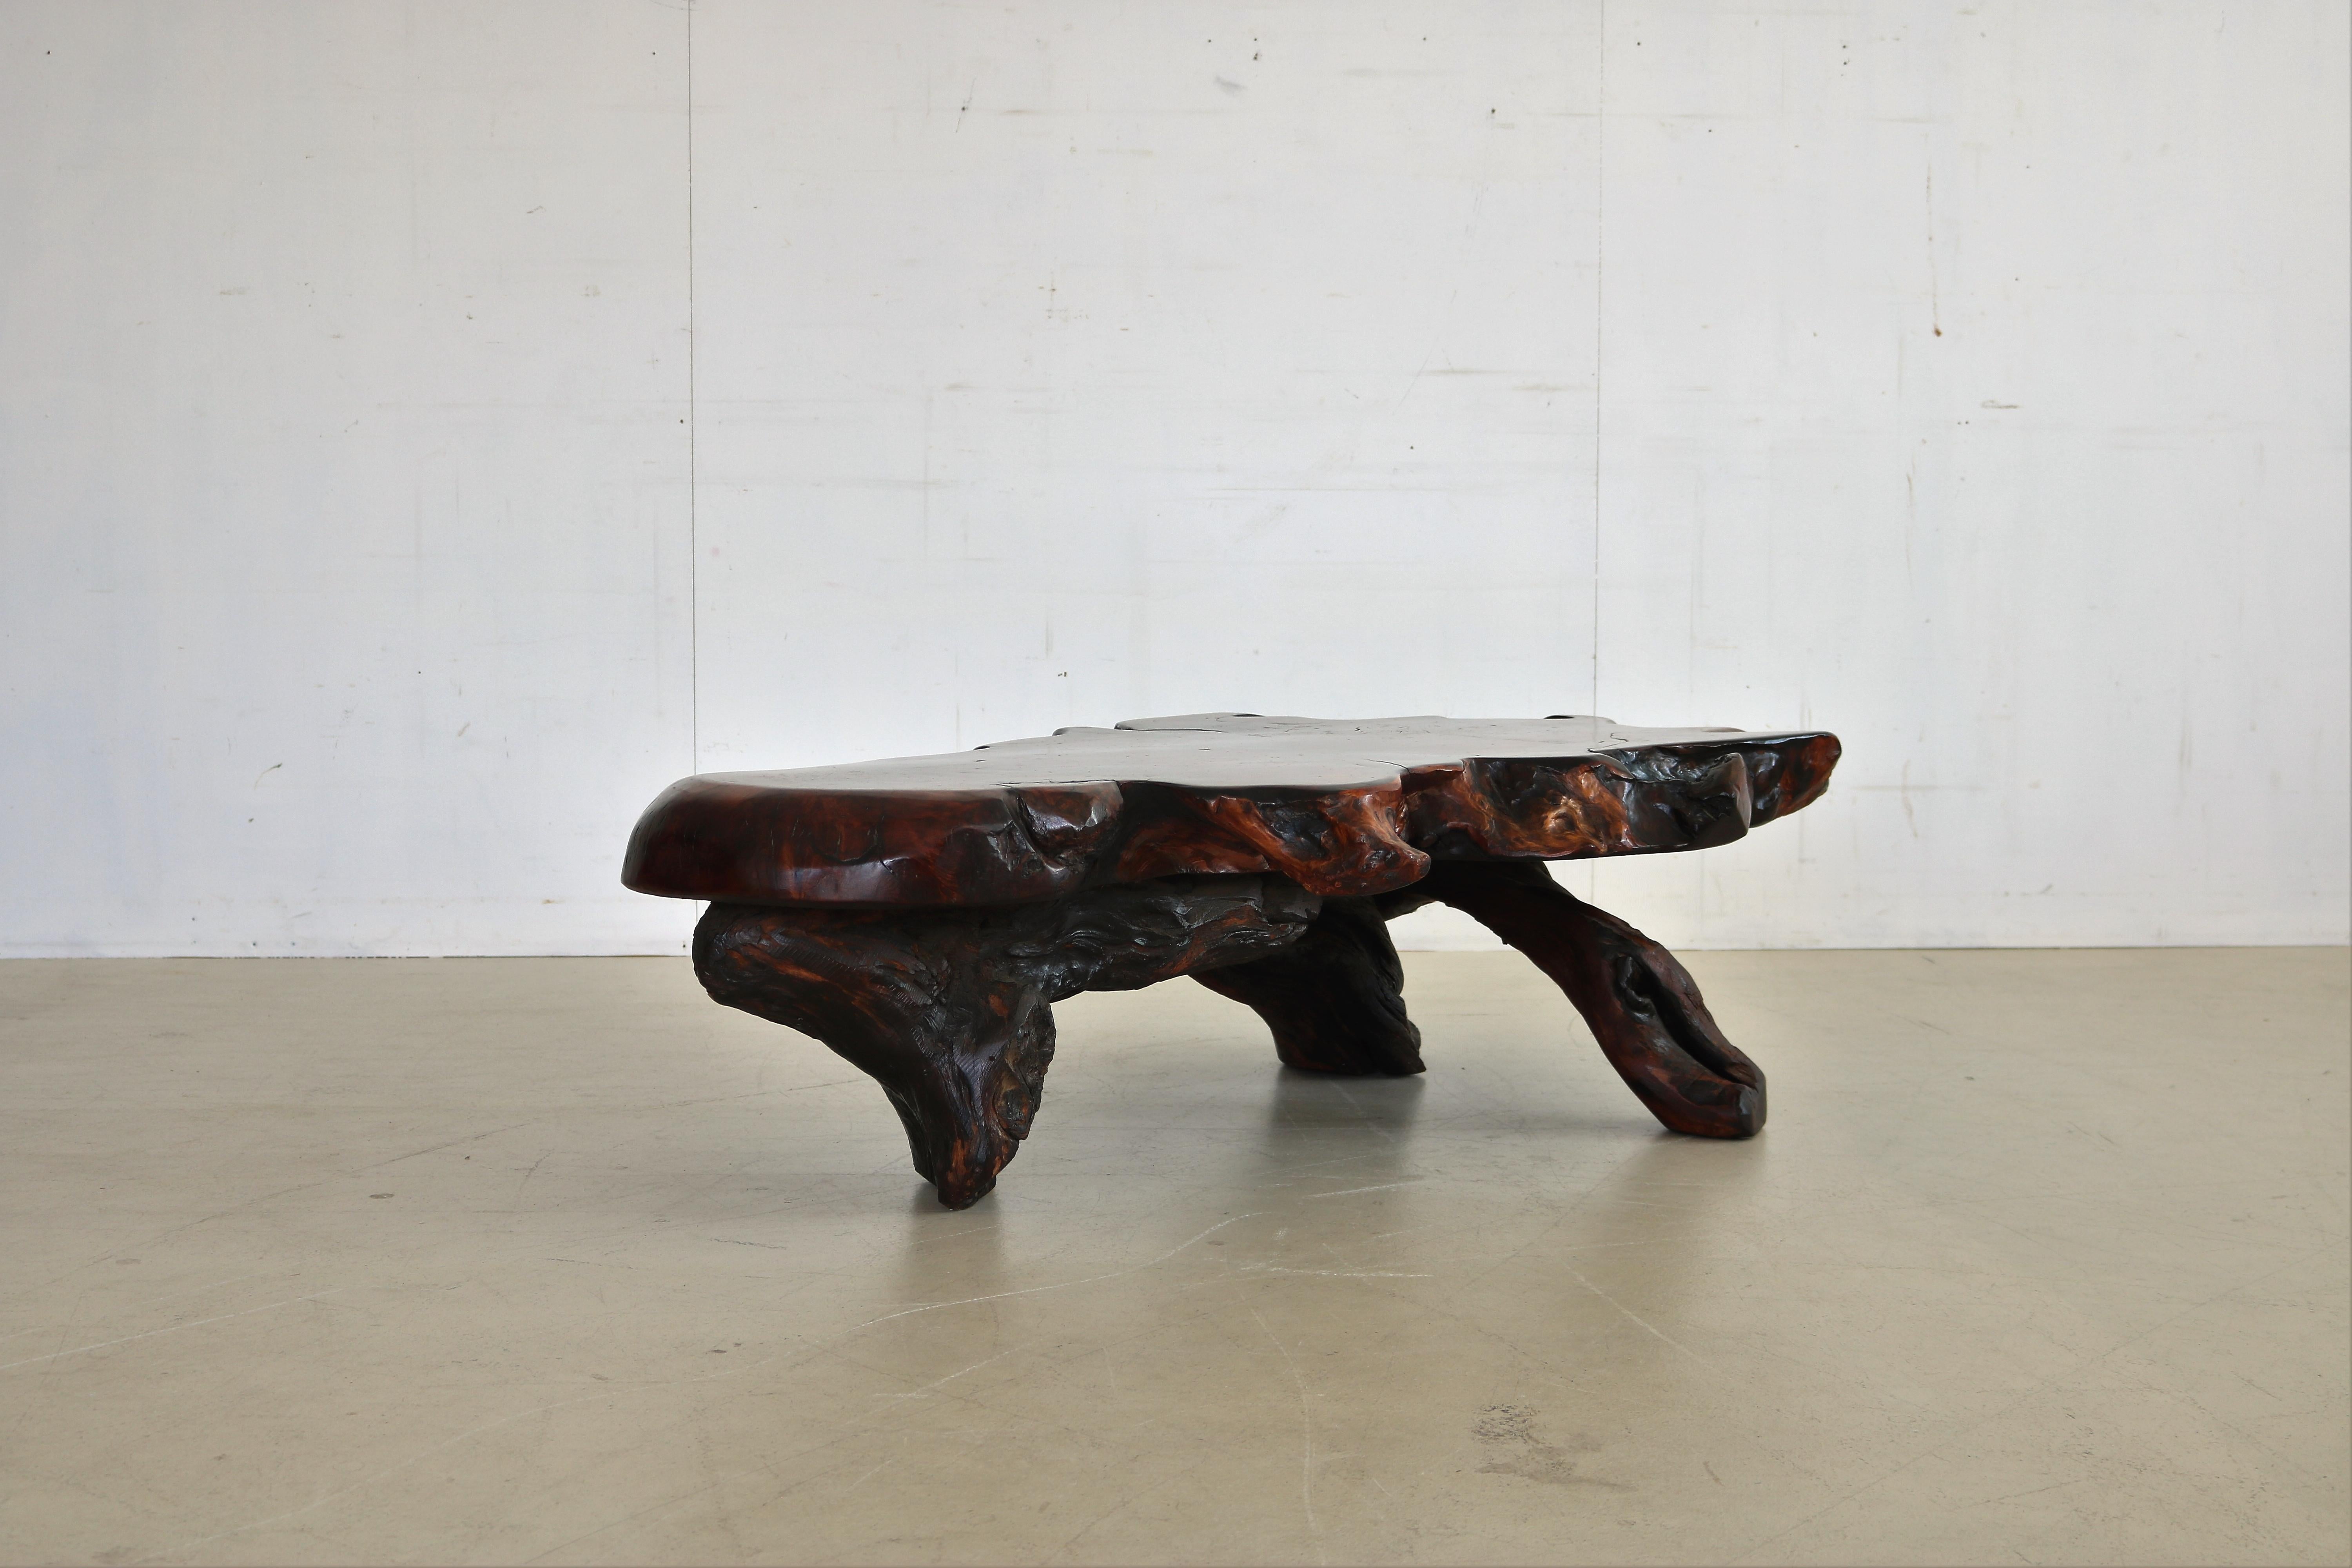 ?Vintage tree trunk coffee table coffee table Danish

Period 1970s
Designs unknown Denmark
Conditions excellent light signs of use
Size 38 x 132 x 78 (hxwxd)

Details wood
Article number 1673